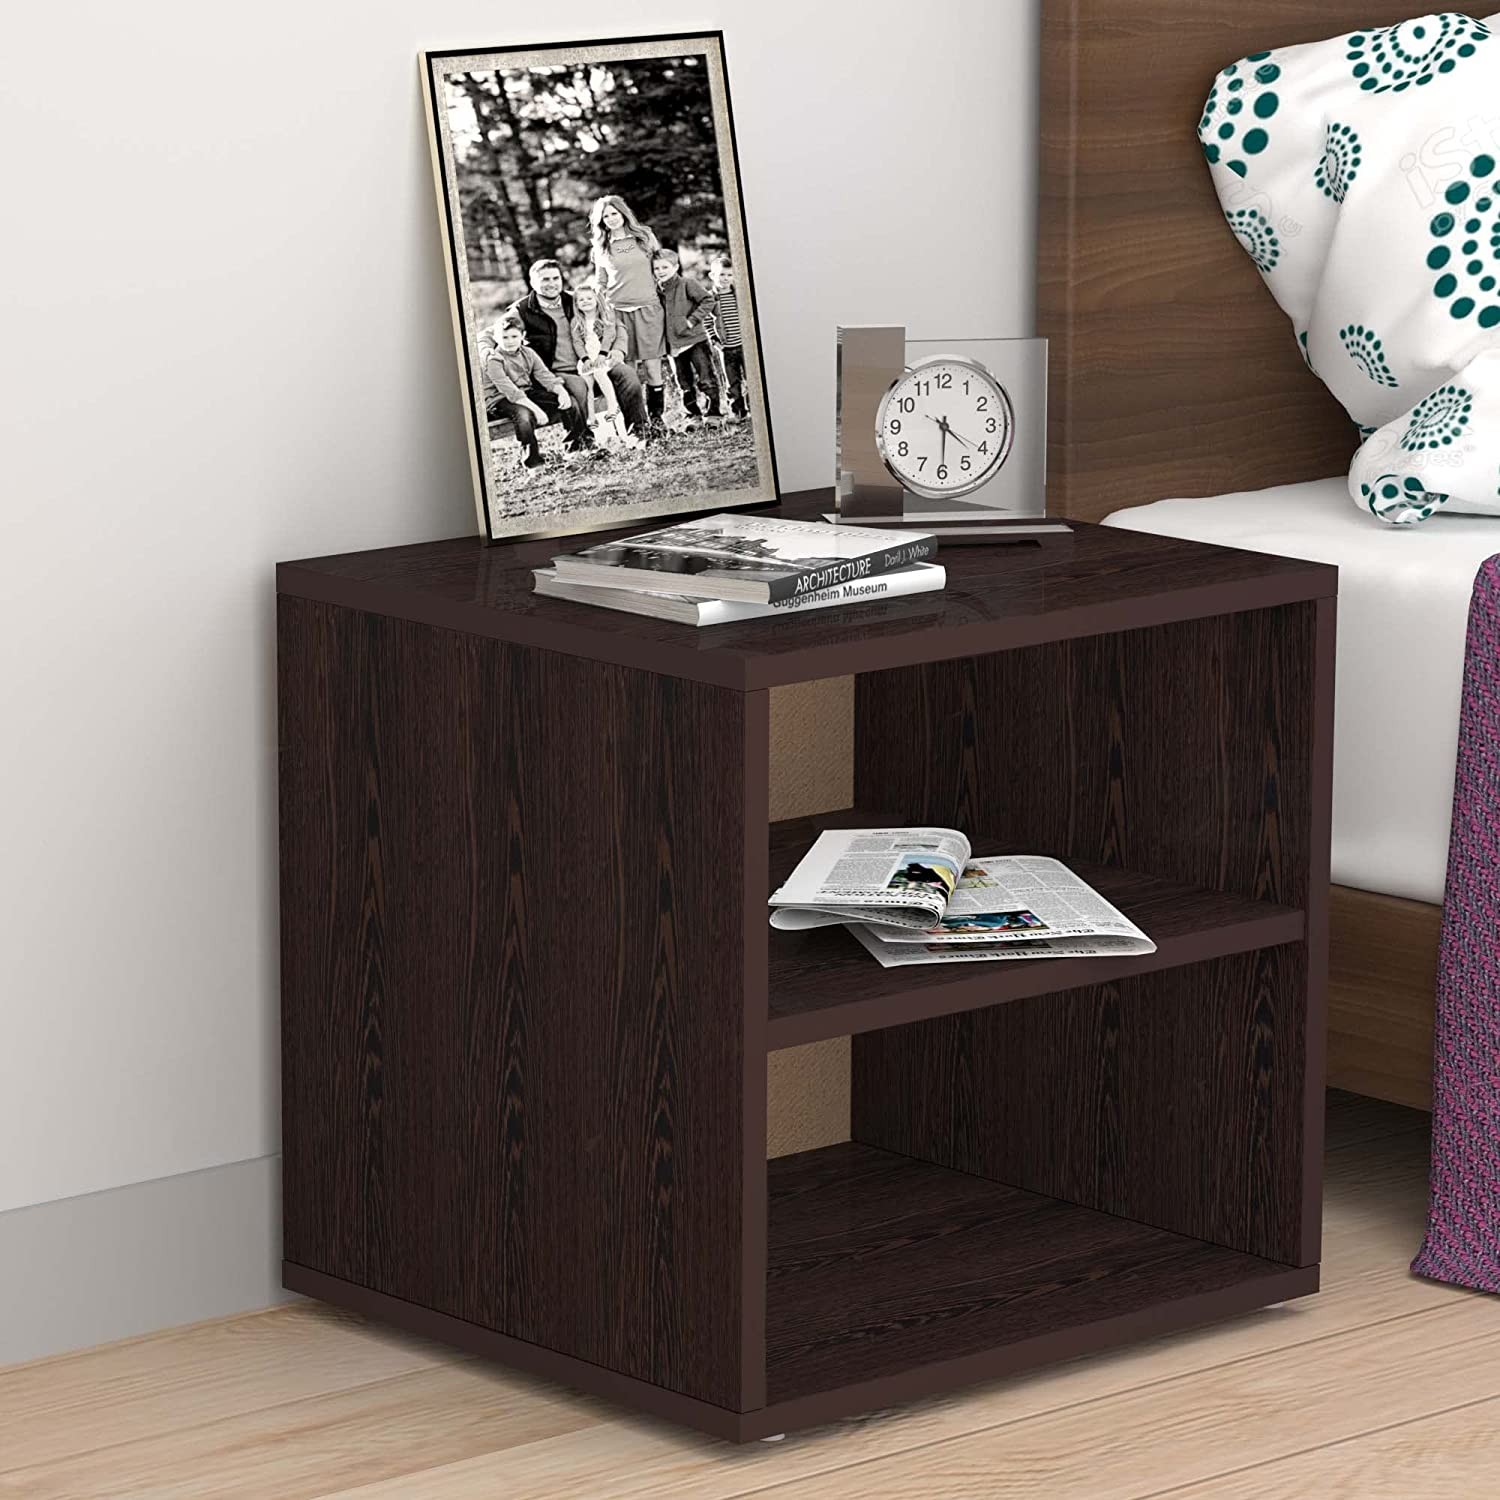 addy-engineered-wood-bed-side-table-end-table-wenge-rd-addy-w